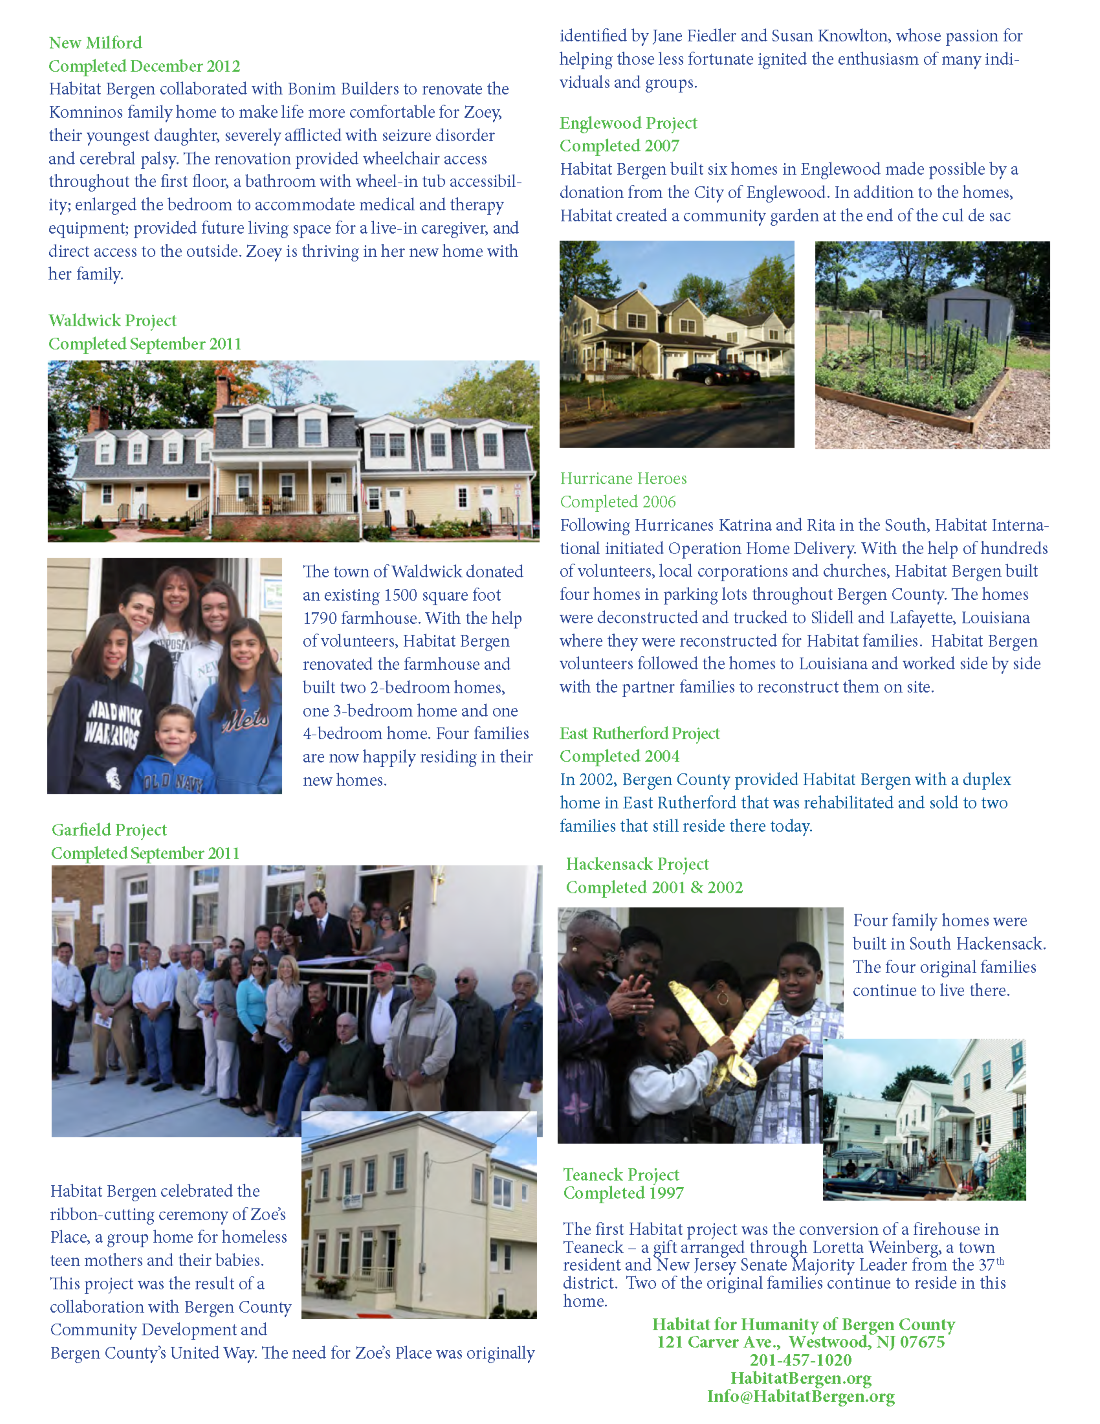 habitat_bergen_history_of_projects_handout_png_page_2_resized.png